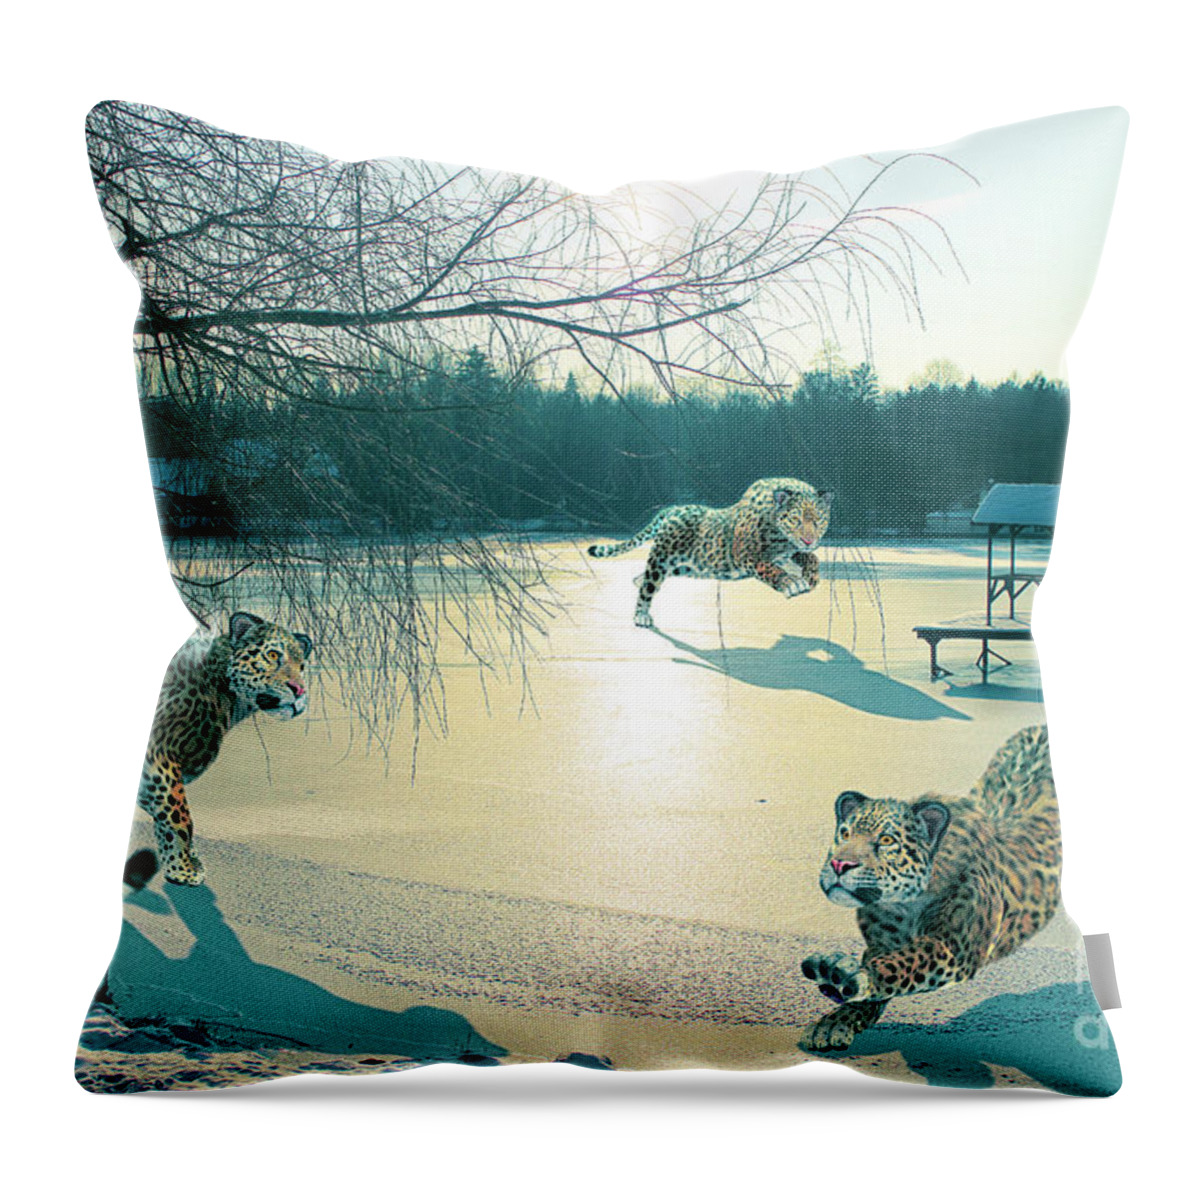 Photo Throw Pillow featuring the digital art Holidays on Ice by Jutta Maria Pusl